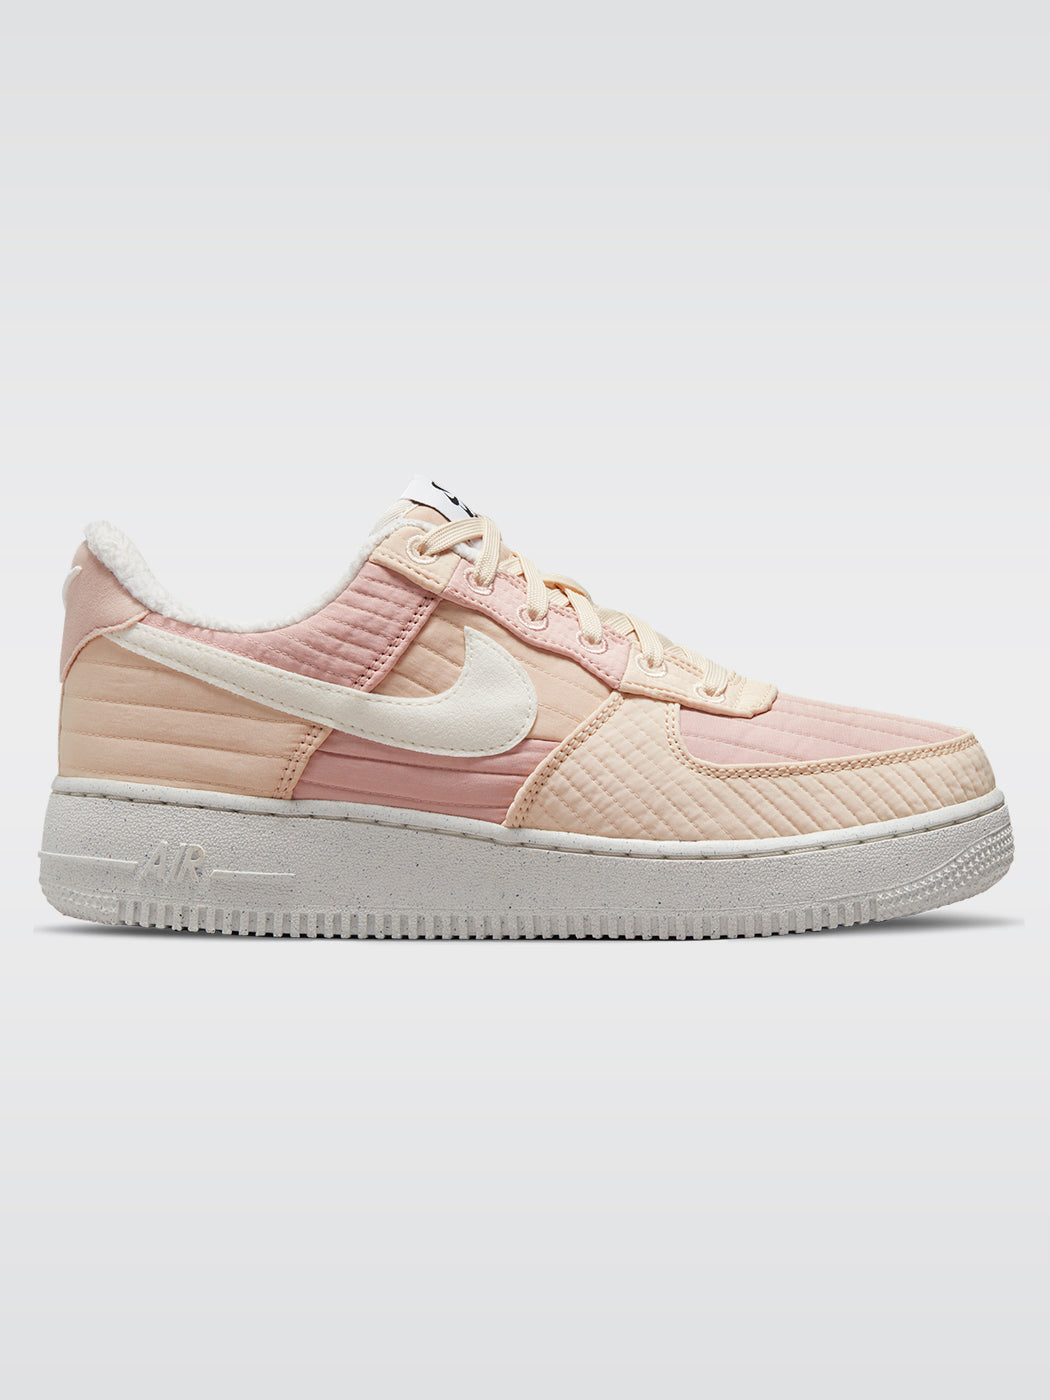 Nike Air Force 1 '07 LxxLIFESTYLE – Carbon38